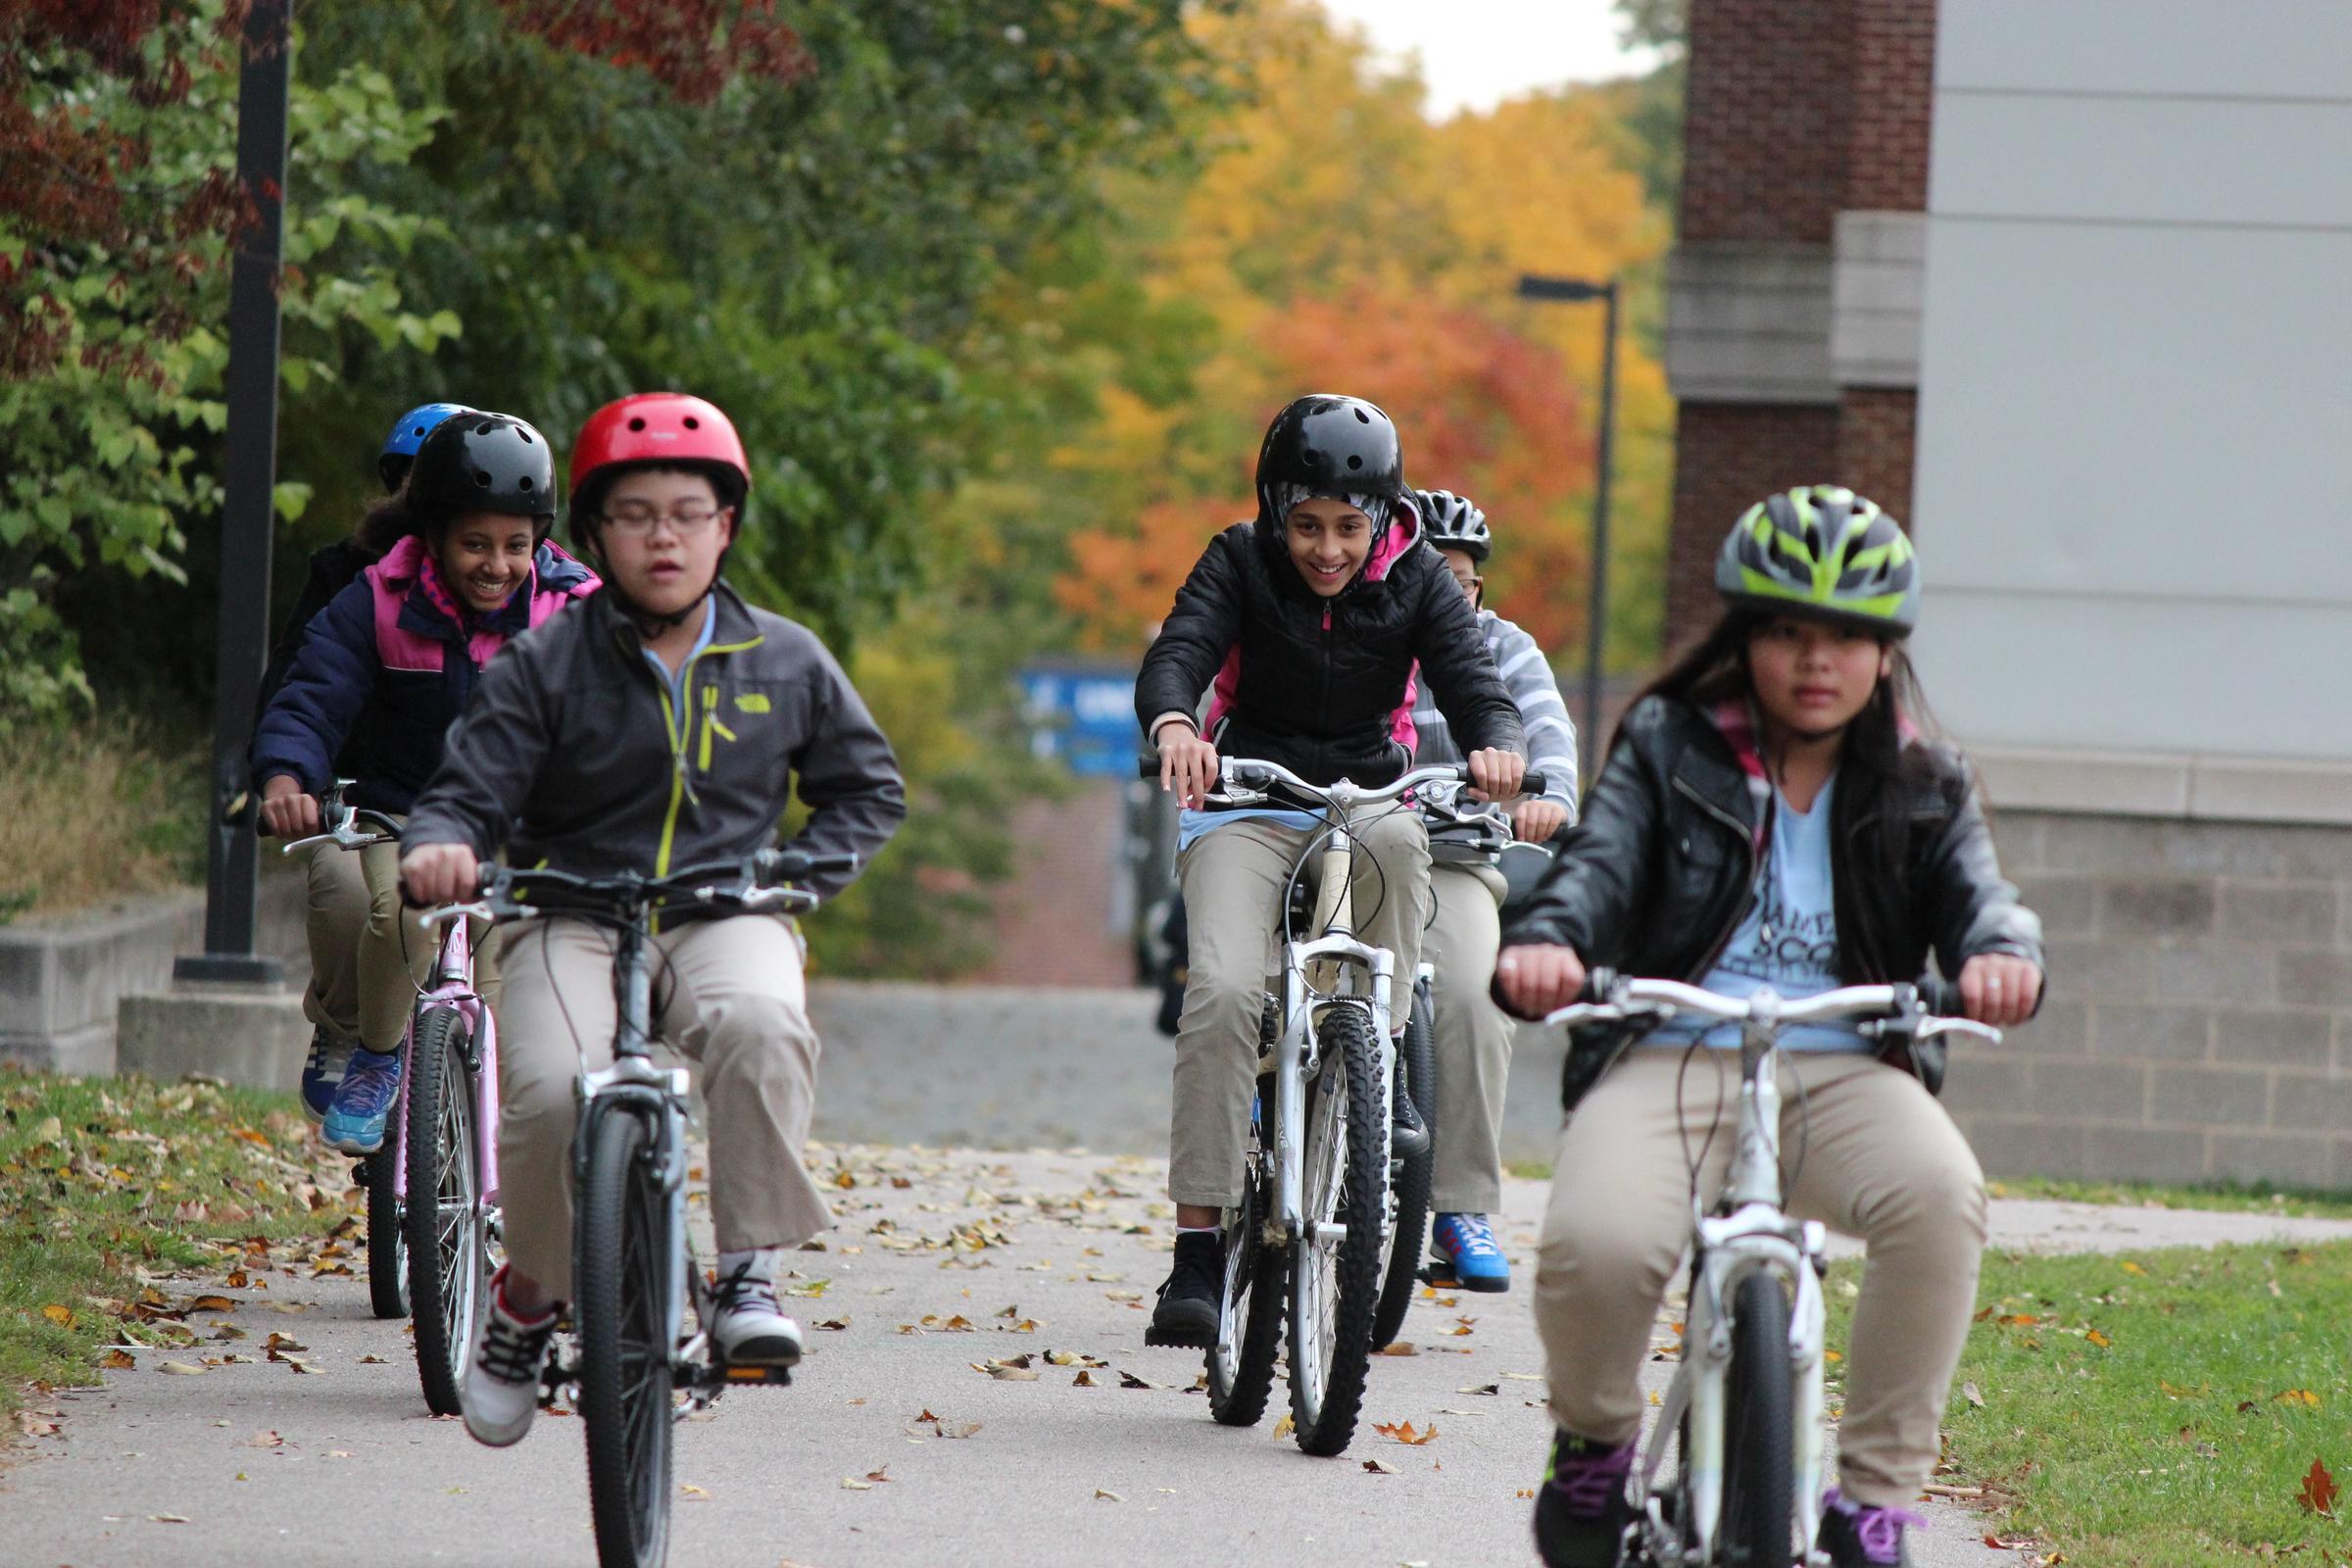 A group of six youth are riding bikes on a path by their school.